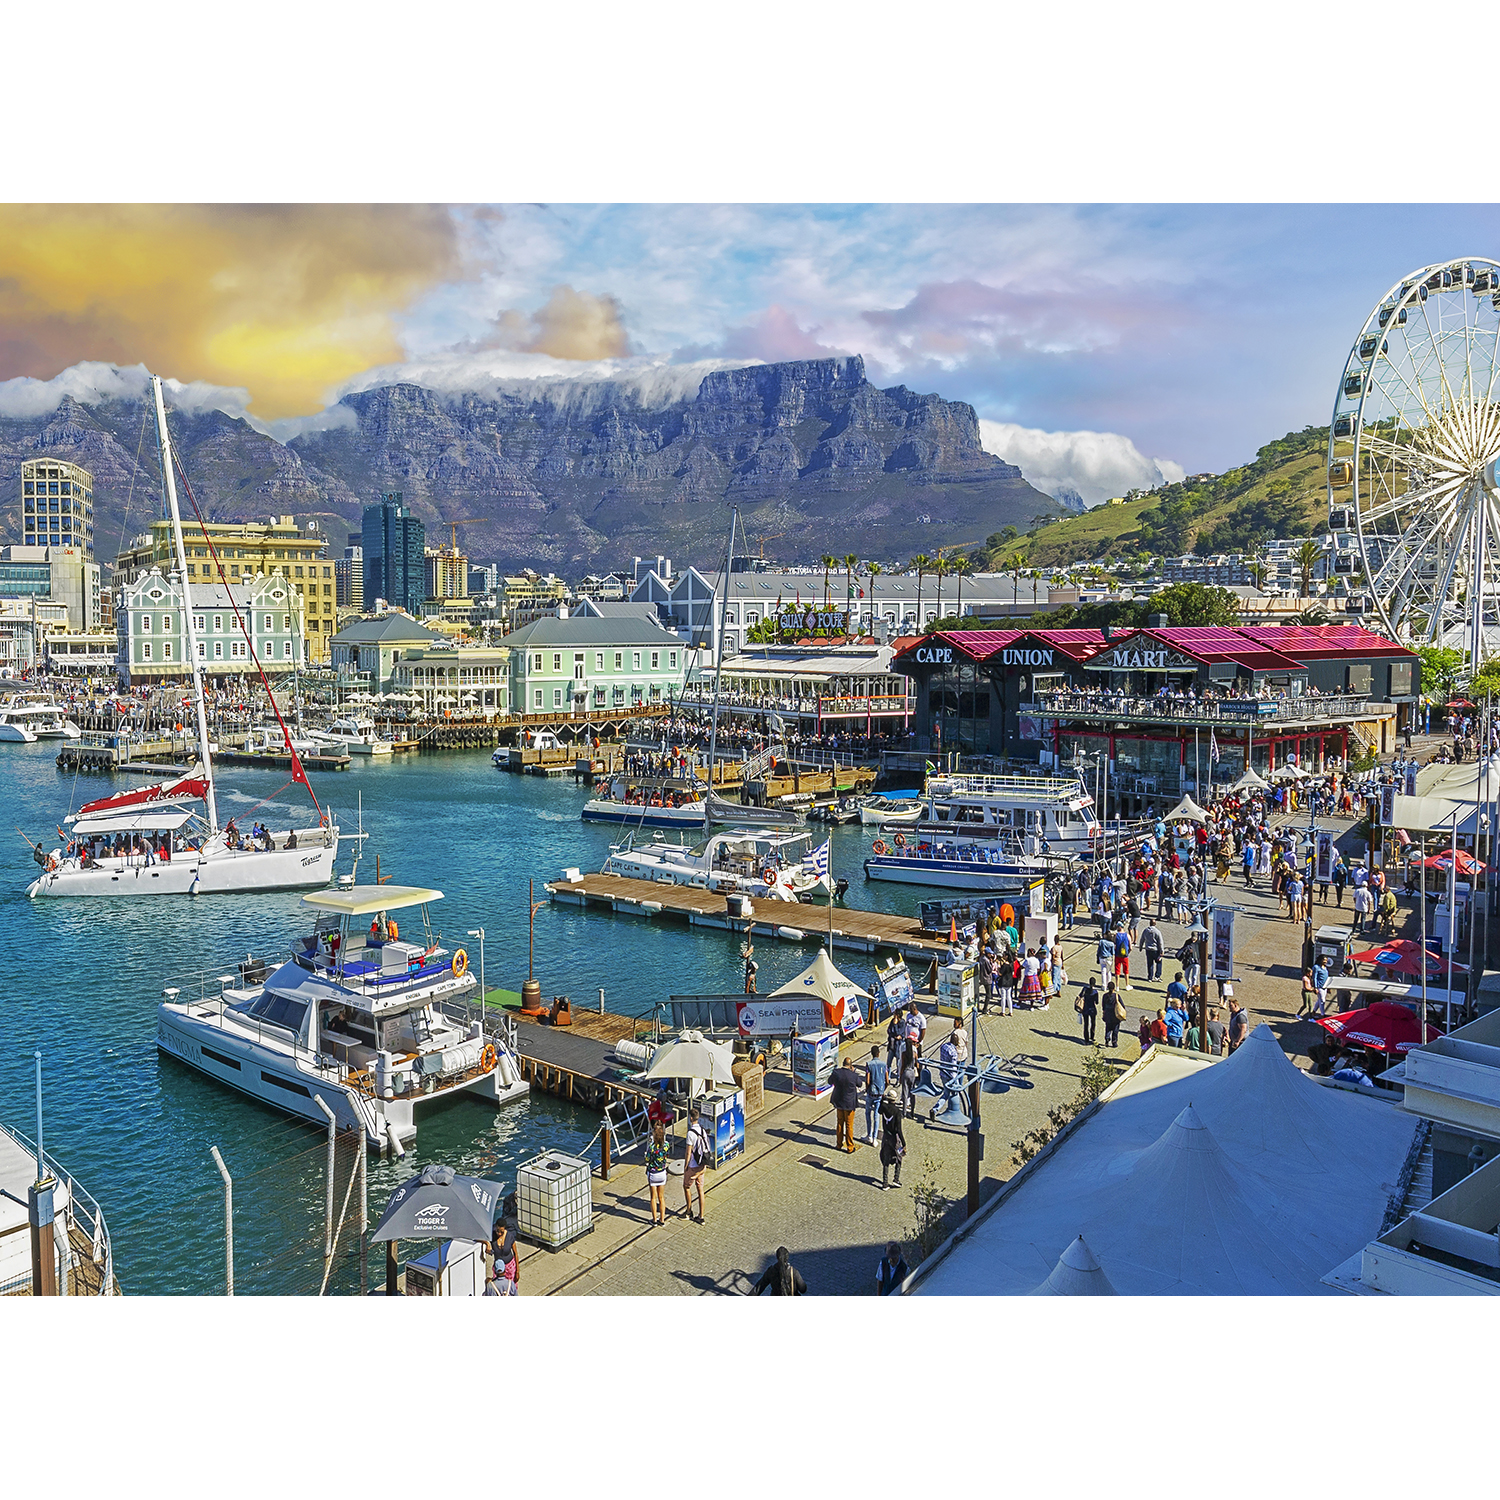 1500pc puzzle of people along V&A with view of Table Mountain